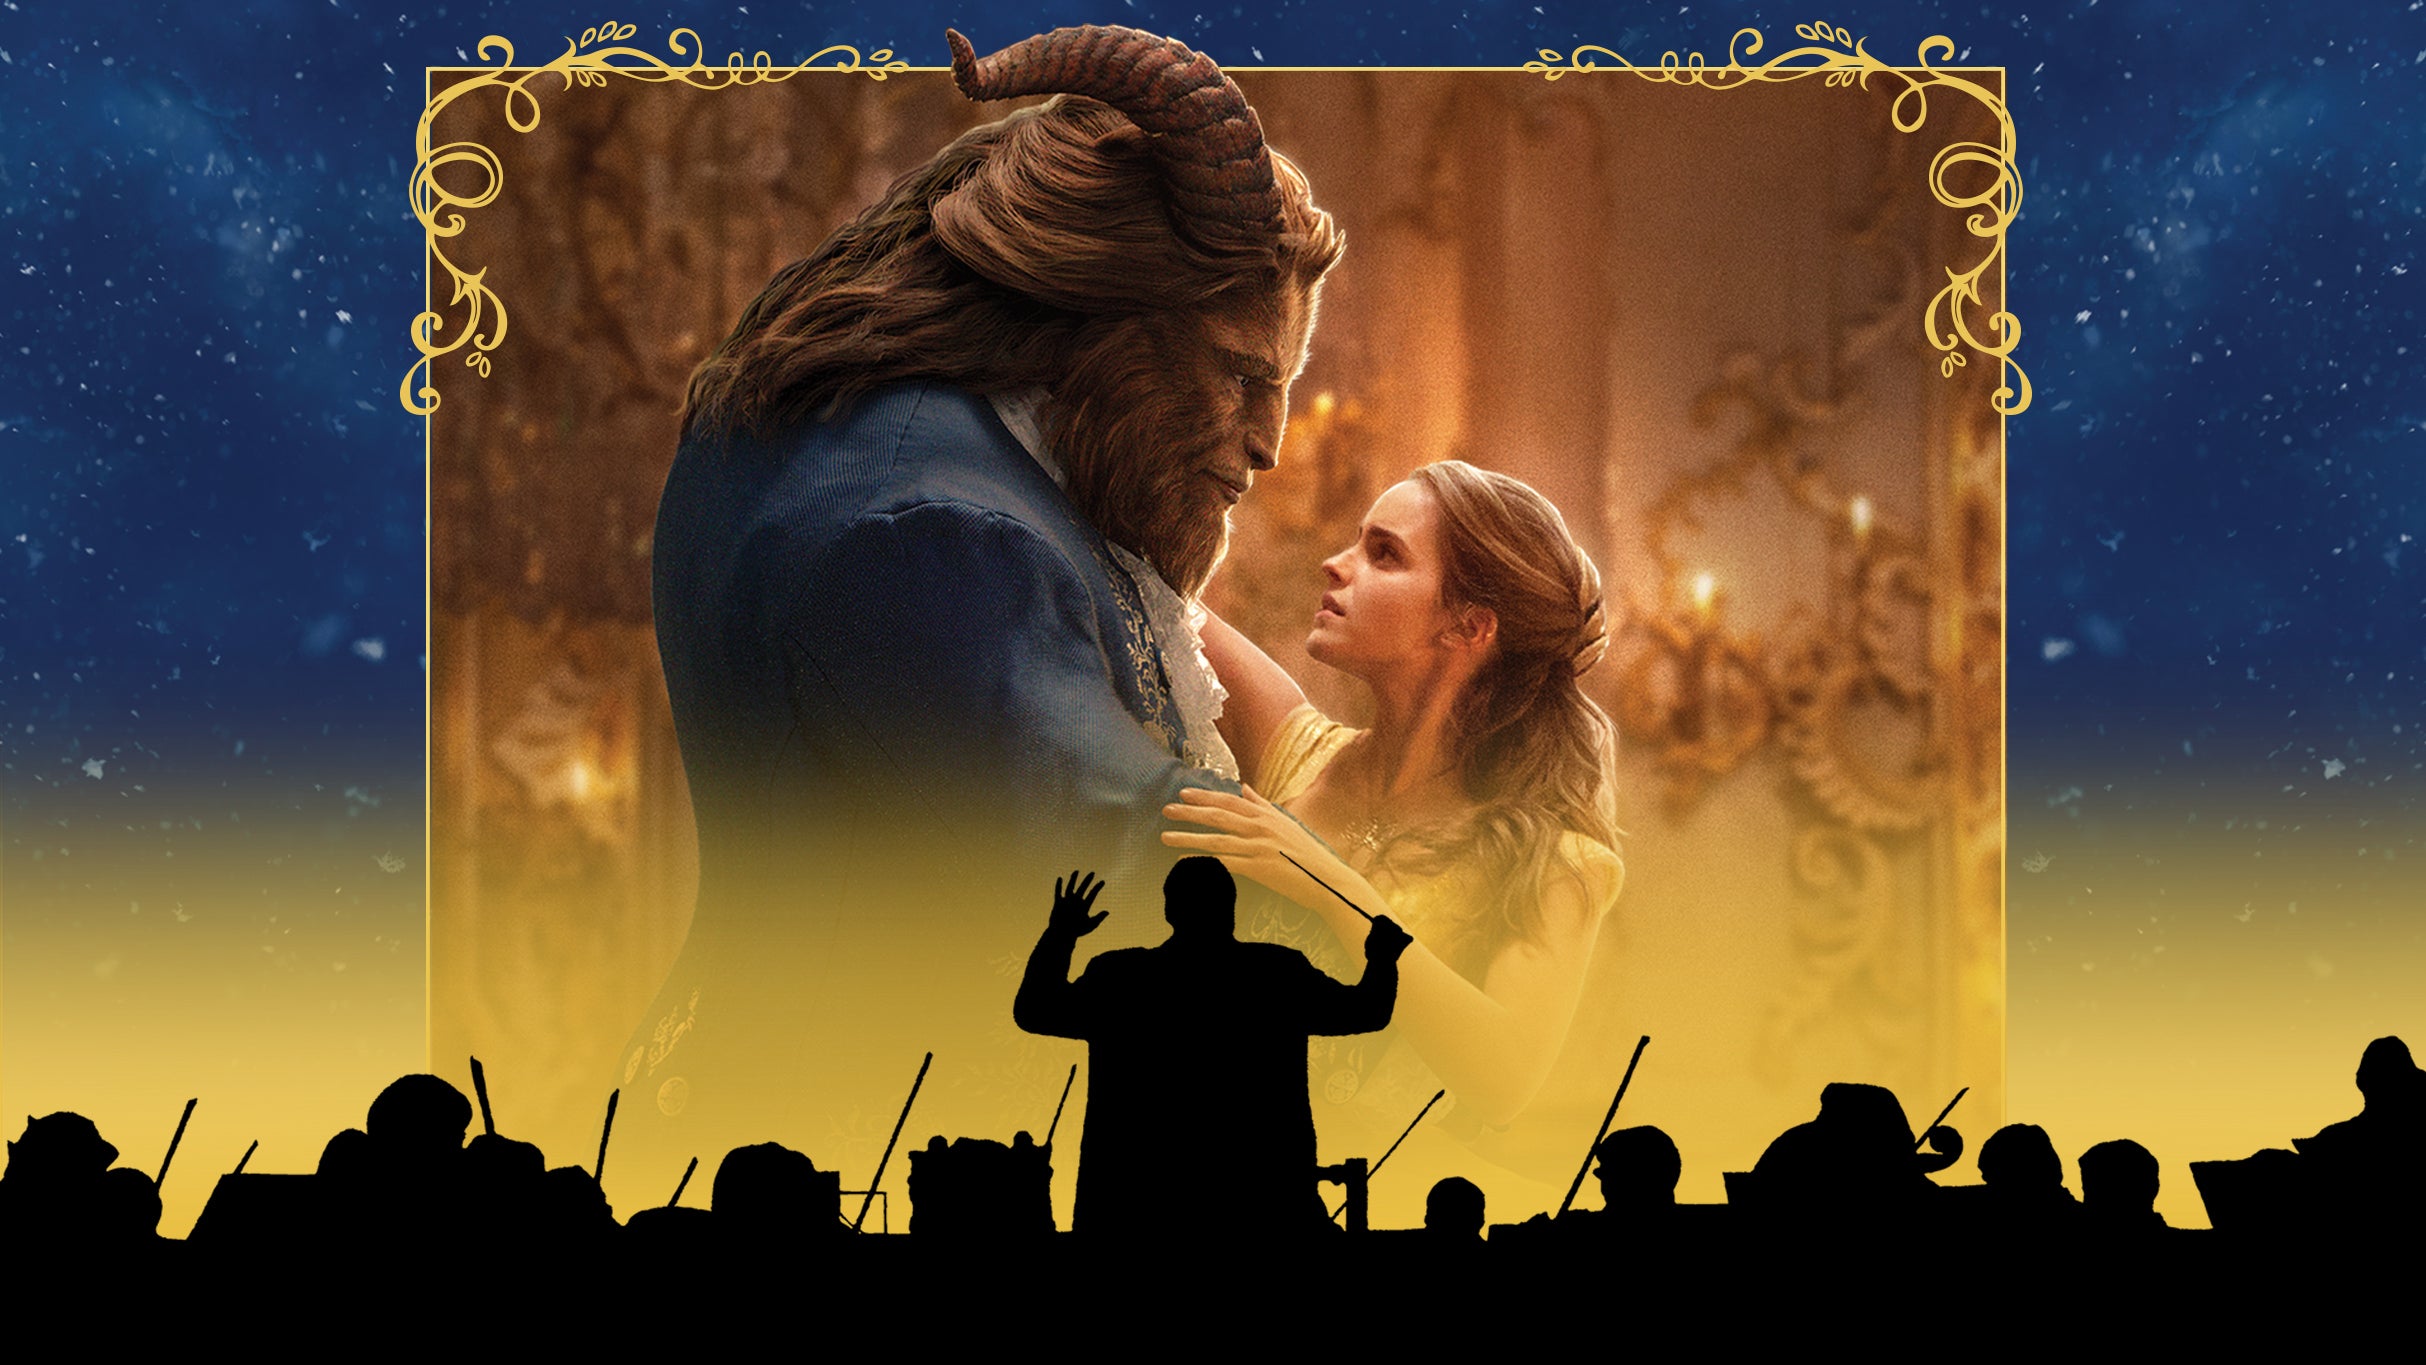 Disney In Concert:Beauty and the Beast Film with Live Orchestra